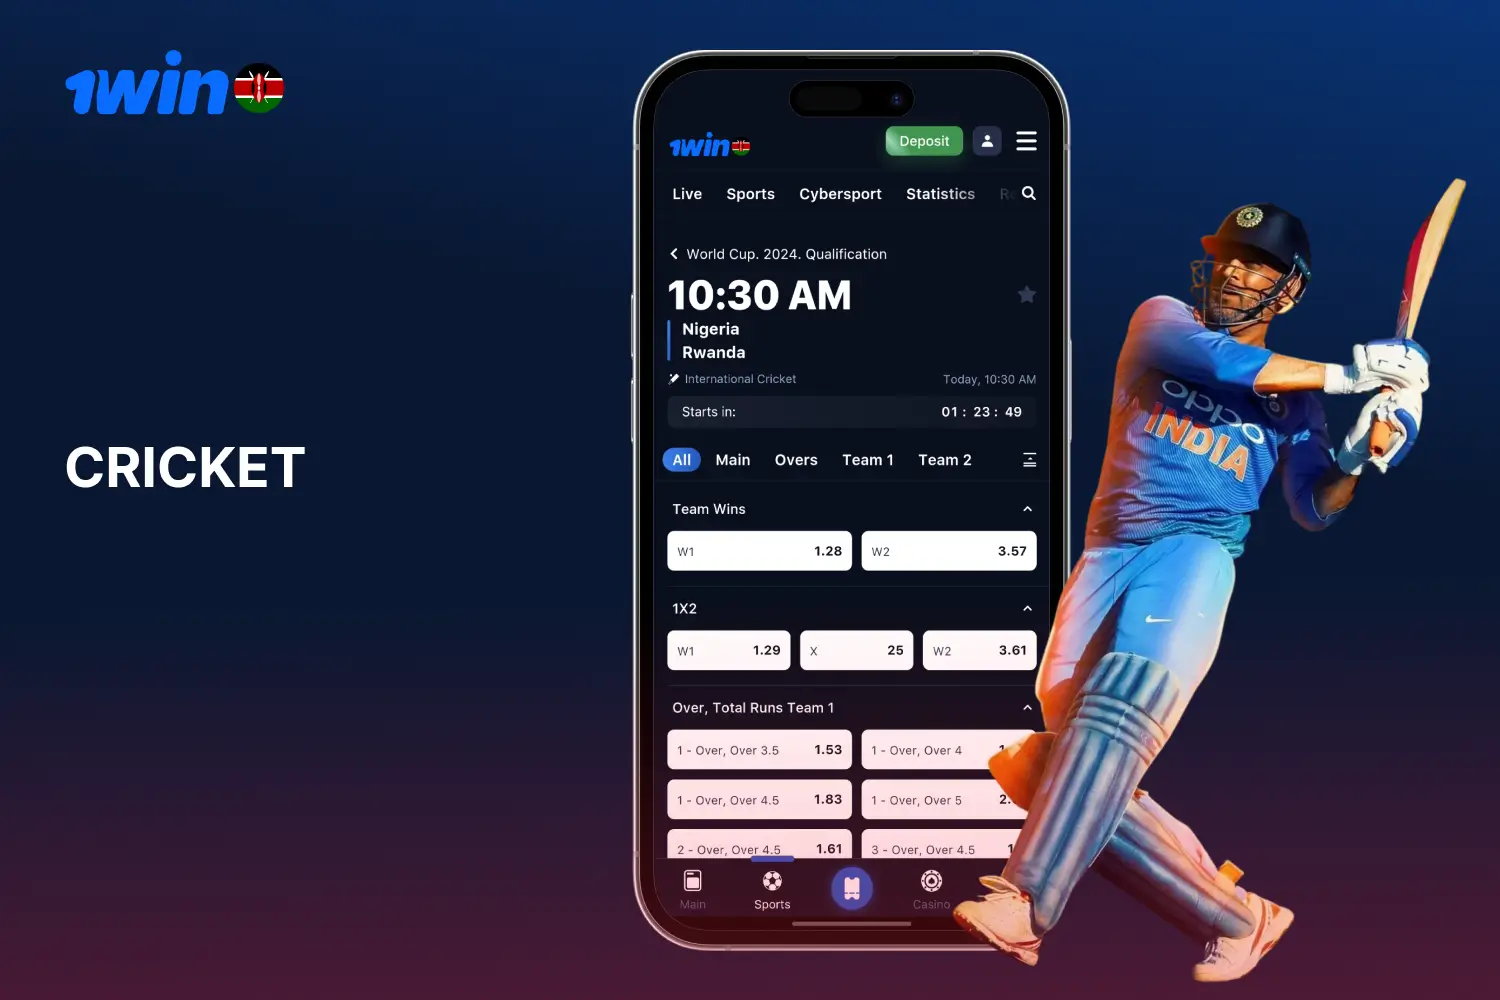 Users from Kenya enjoy betting on cricket competitions as well as being able to watch live streaming on 1win